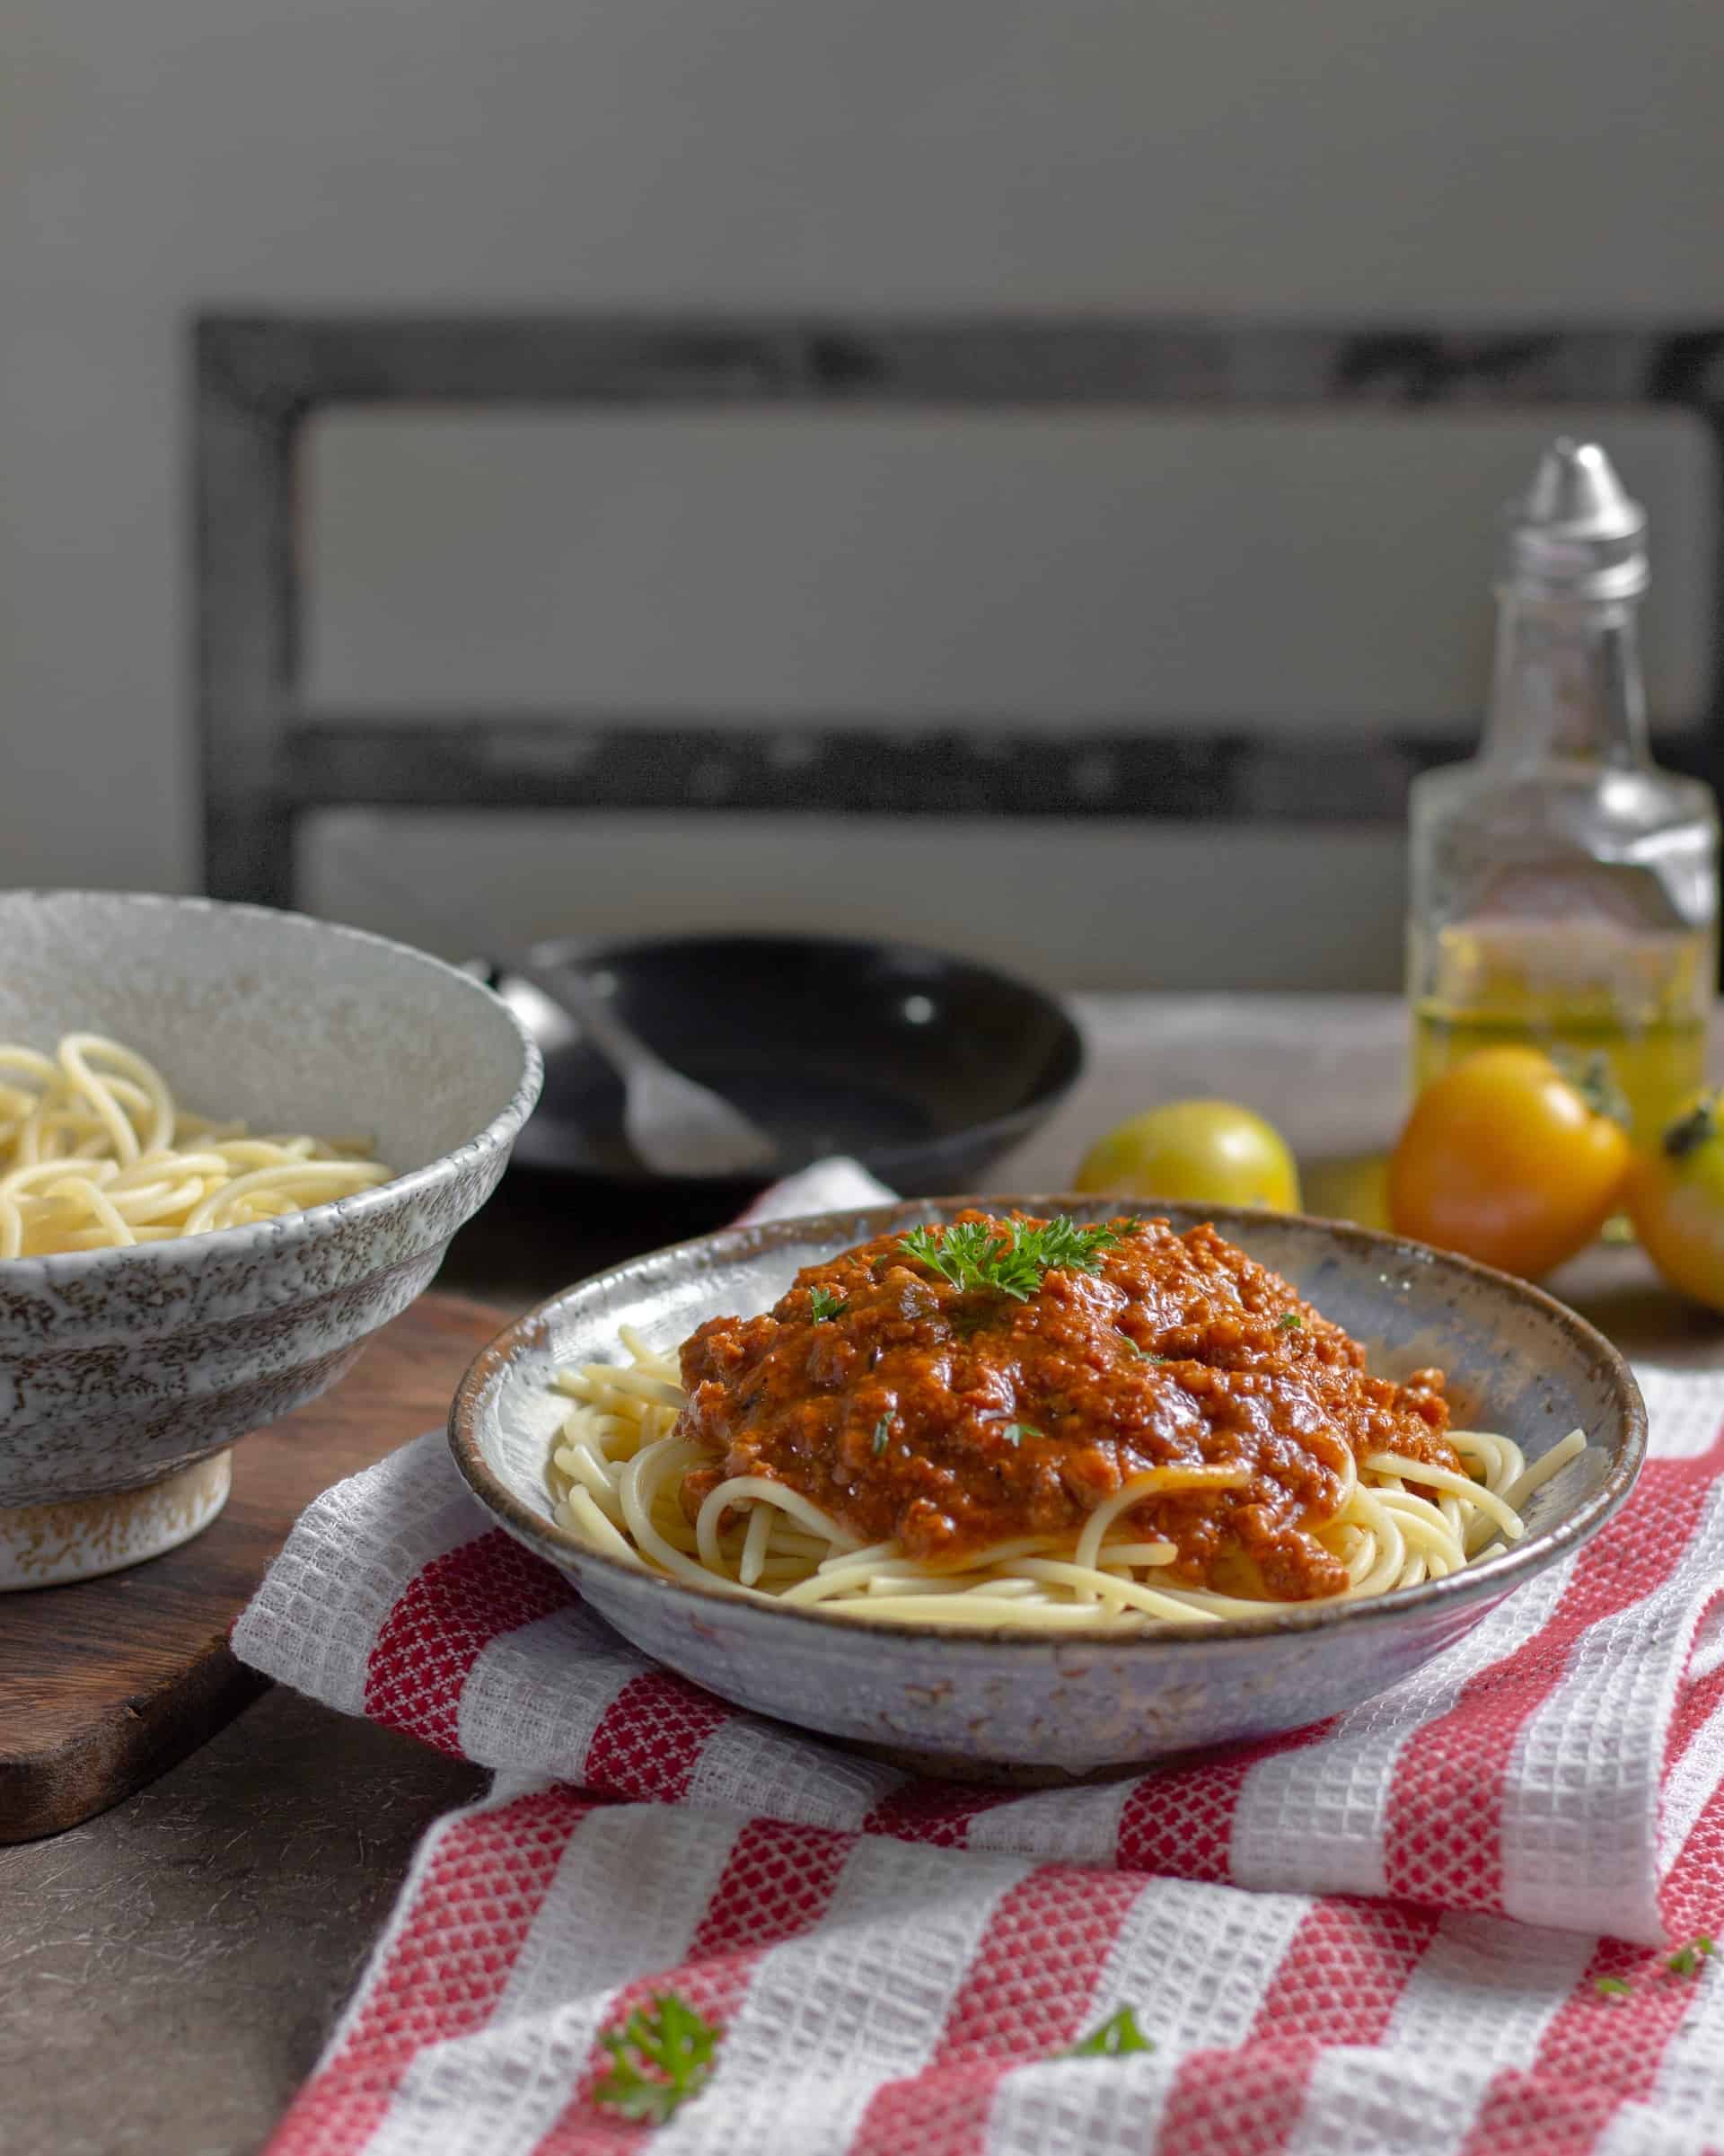 Bowl of spaghetti bolognese on red and white striped cloth with olive oil and plain pasta bowl in the background.